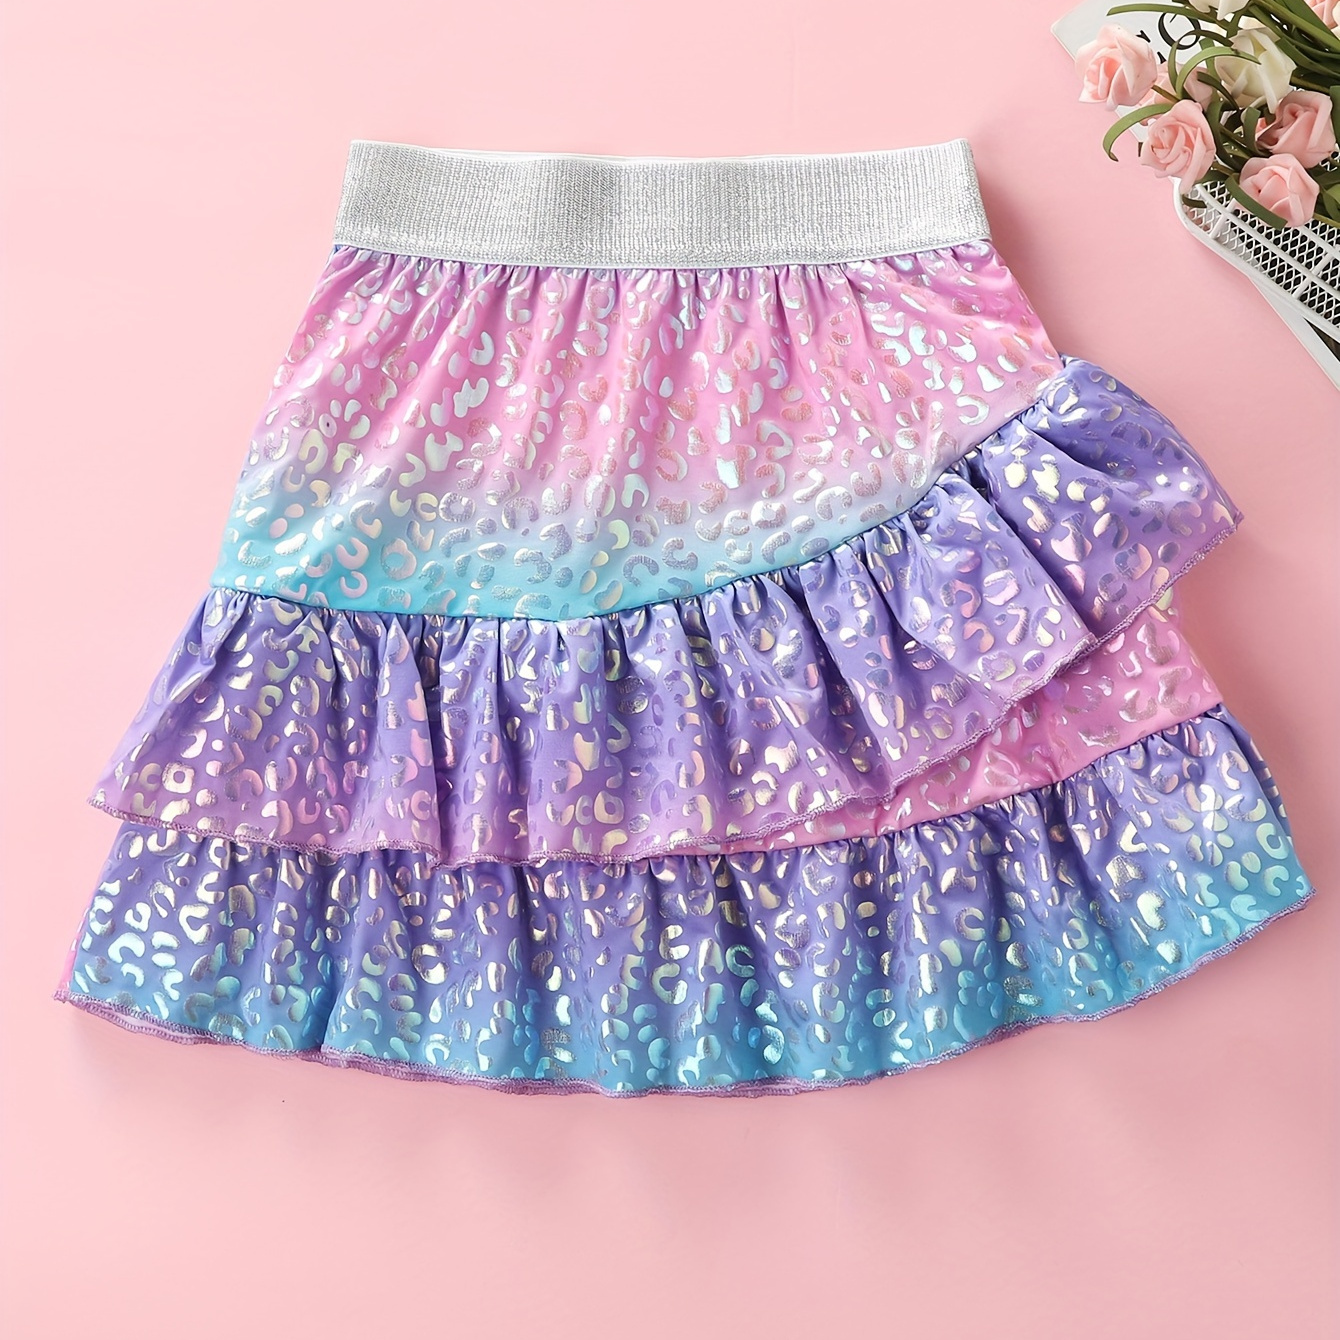 

Girls' Mermaid Scale Rainbow Tutu Skirt, Multi-layered Colorful Party Princess Skirt, Summer Birthday Party Fashion For Little & Young Girls